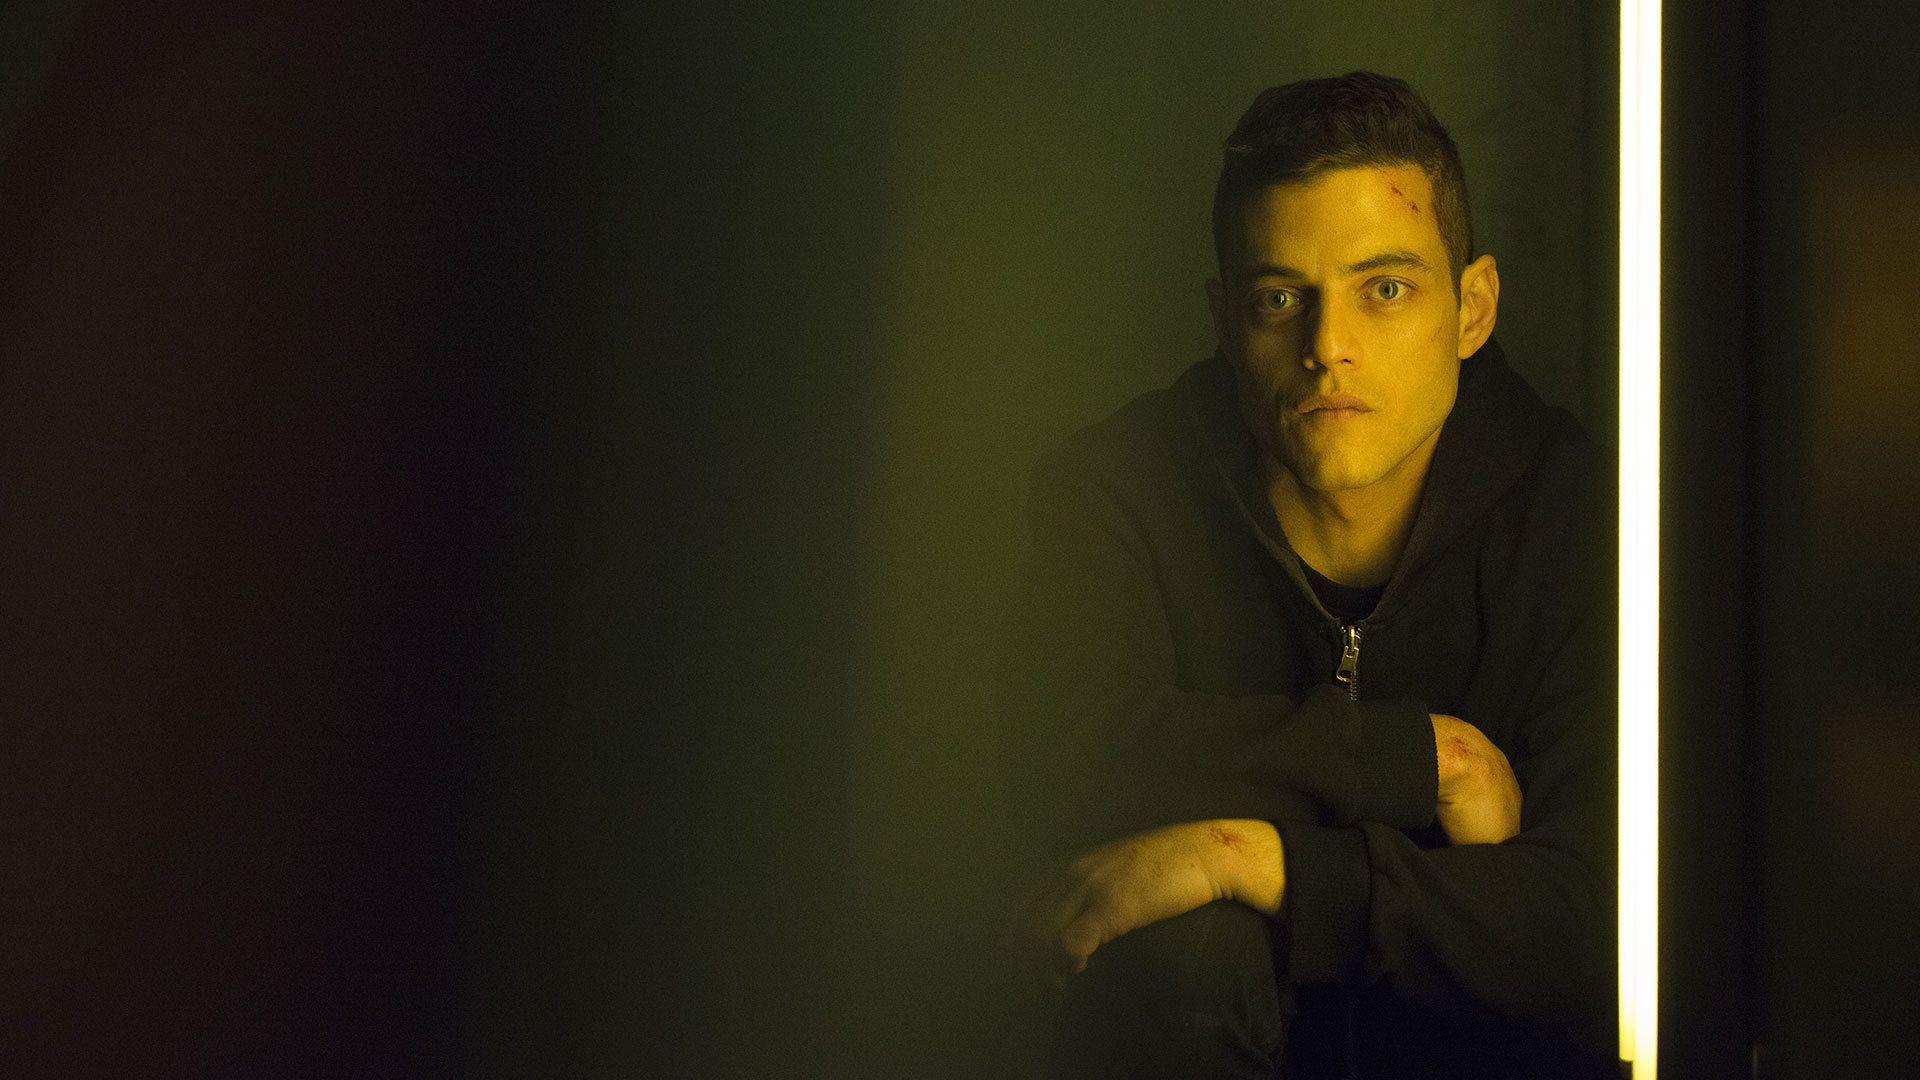 The Best Moments and Episodes of 'Mr. Robot' So Far